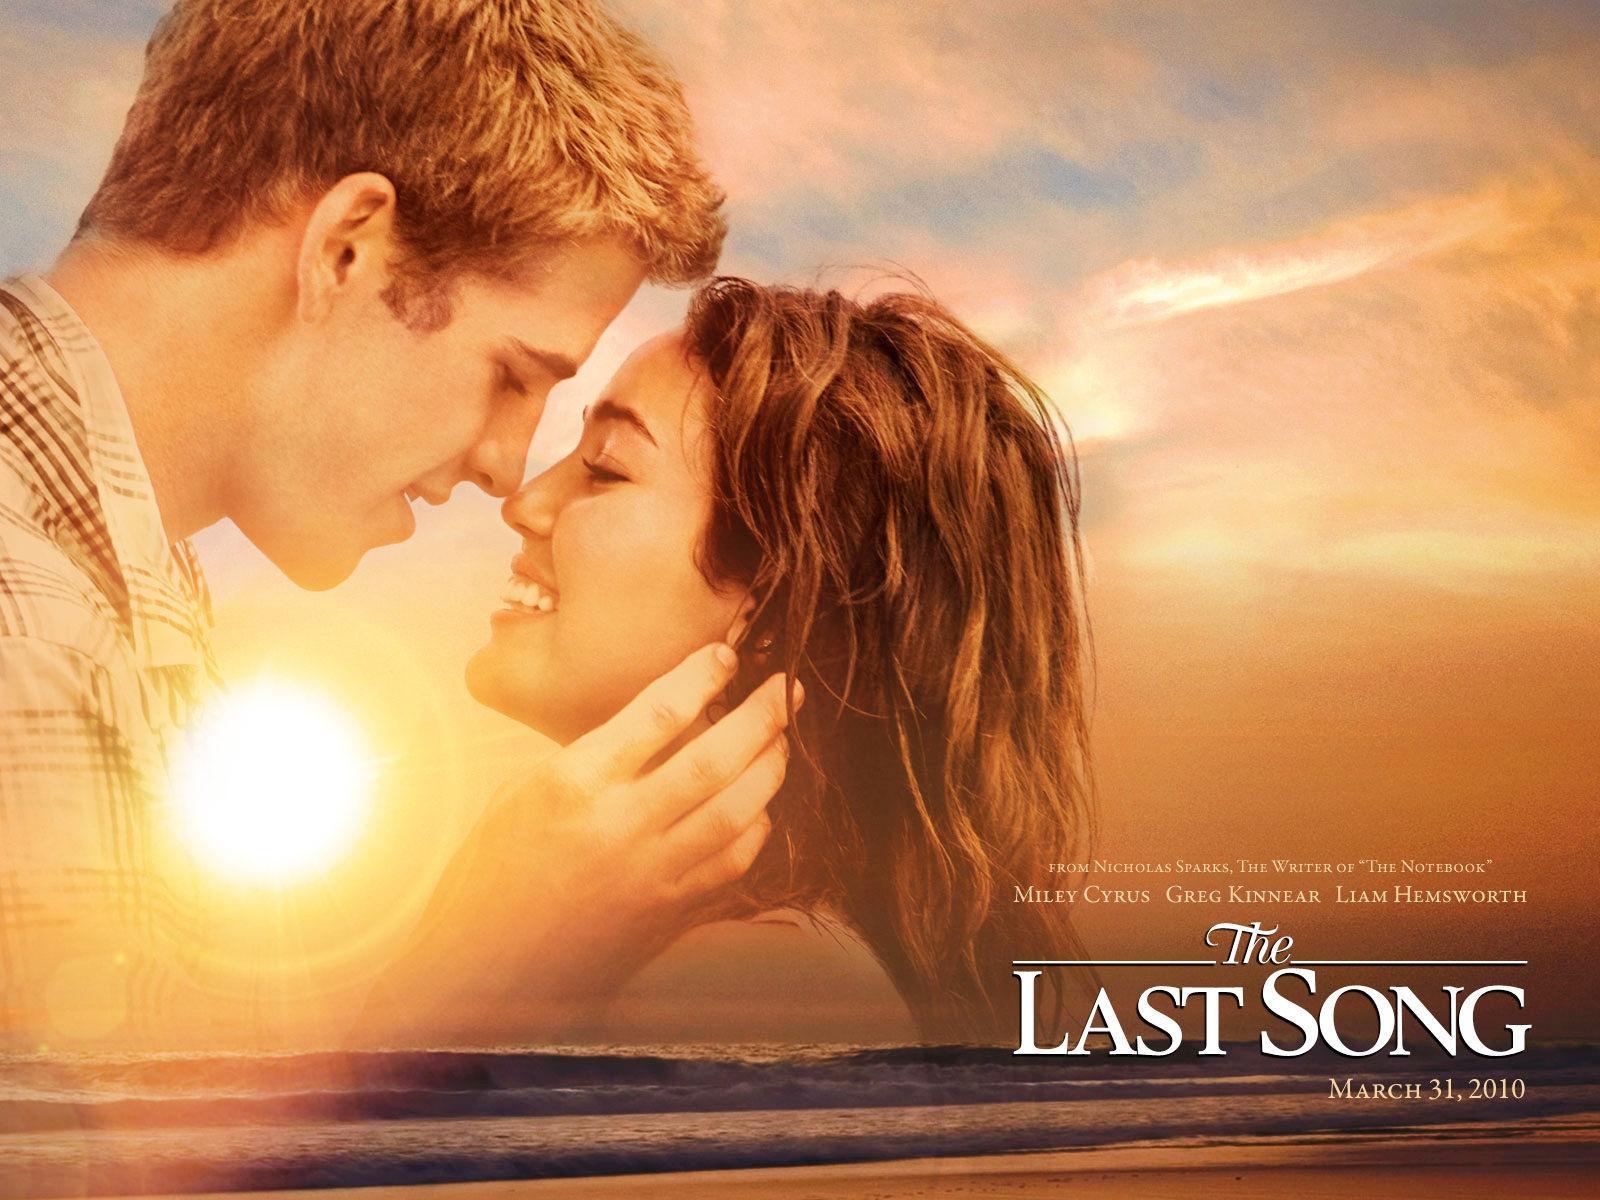 The Last Song image the last song wallpaper HD wallpaper